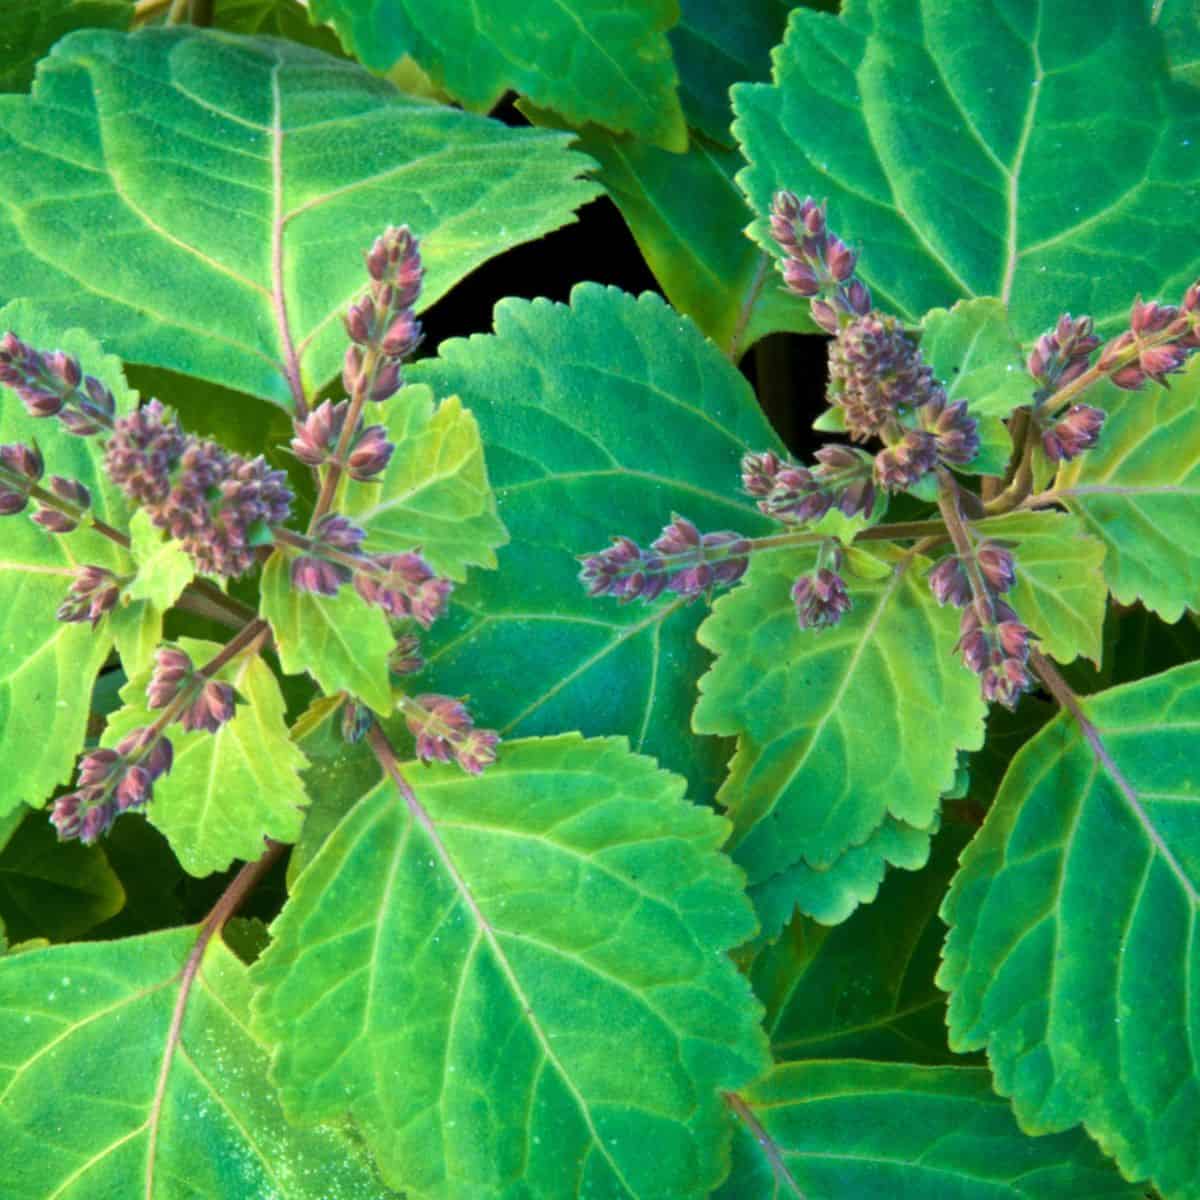 A close up of a plant with green leaves and purple flowers, known for its luck-enhancing properties.